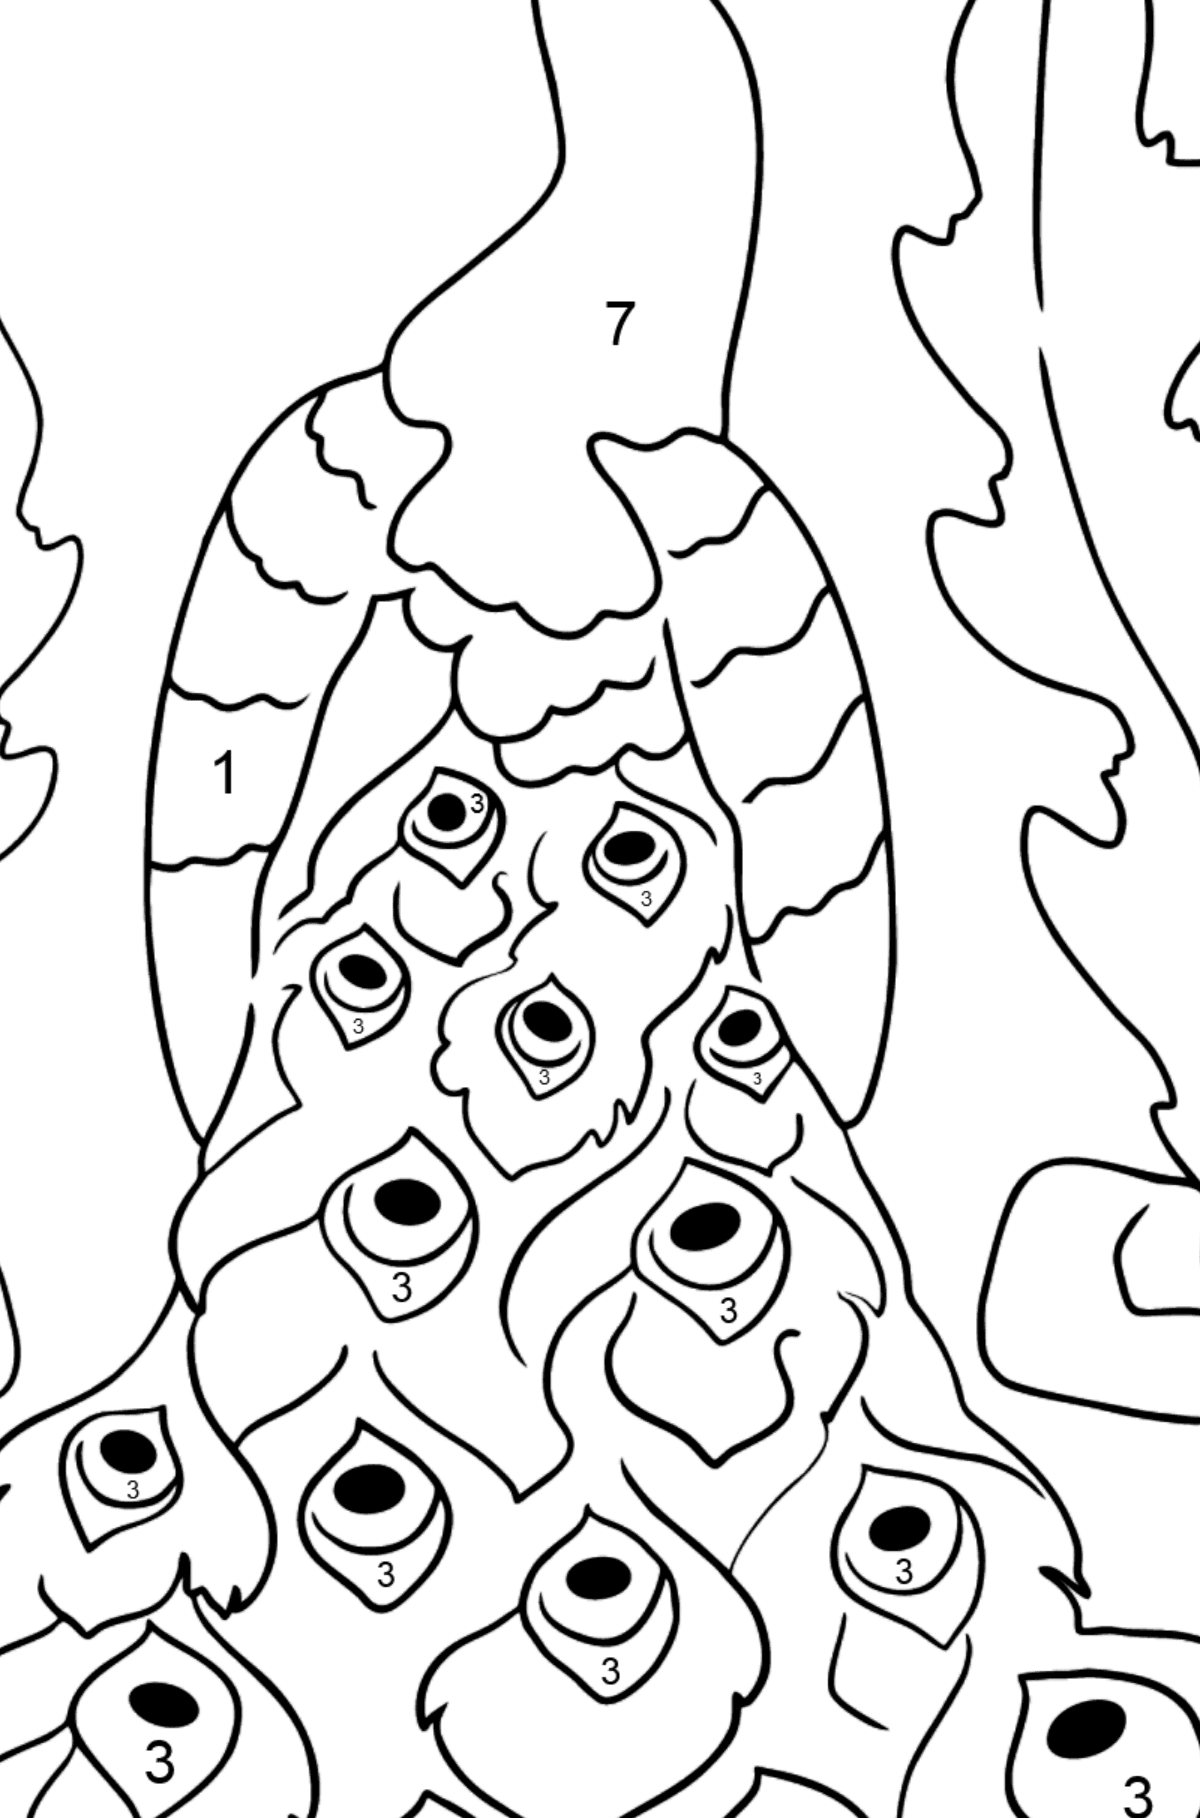 A Pompous and Haughty Peacock Coloring Page - Coloring by Numbers for Kids